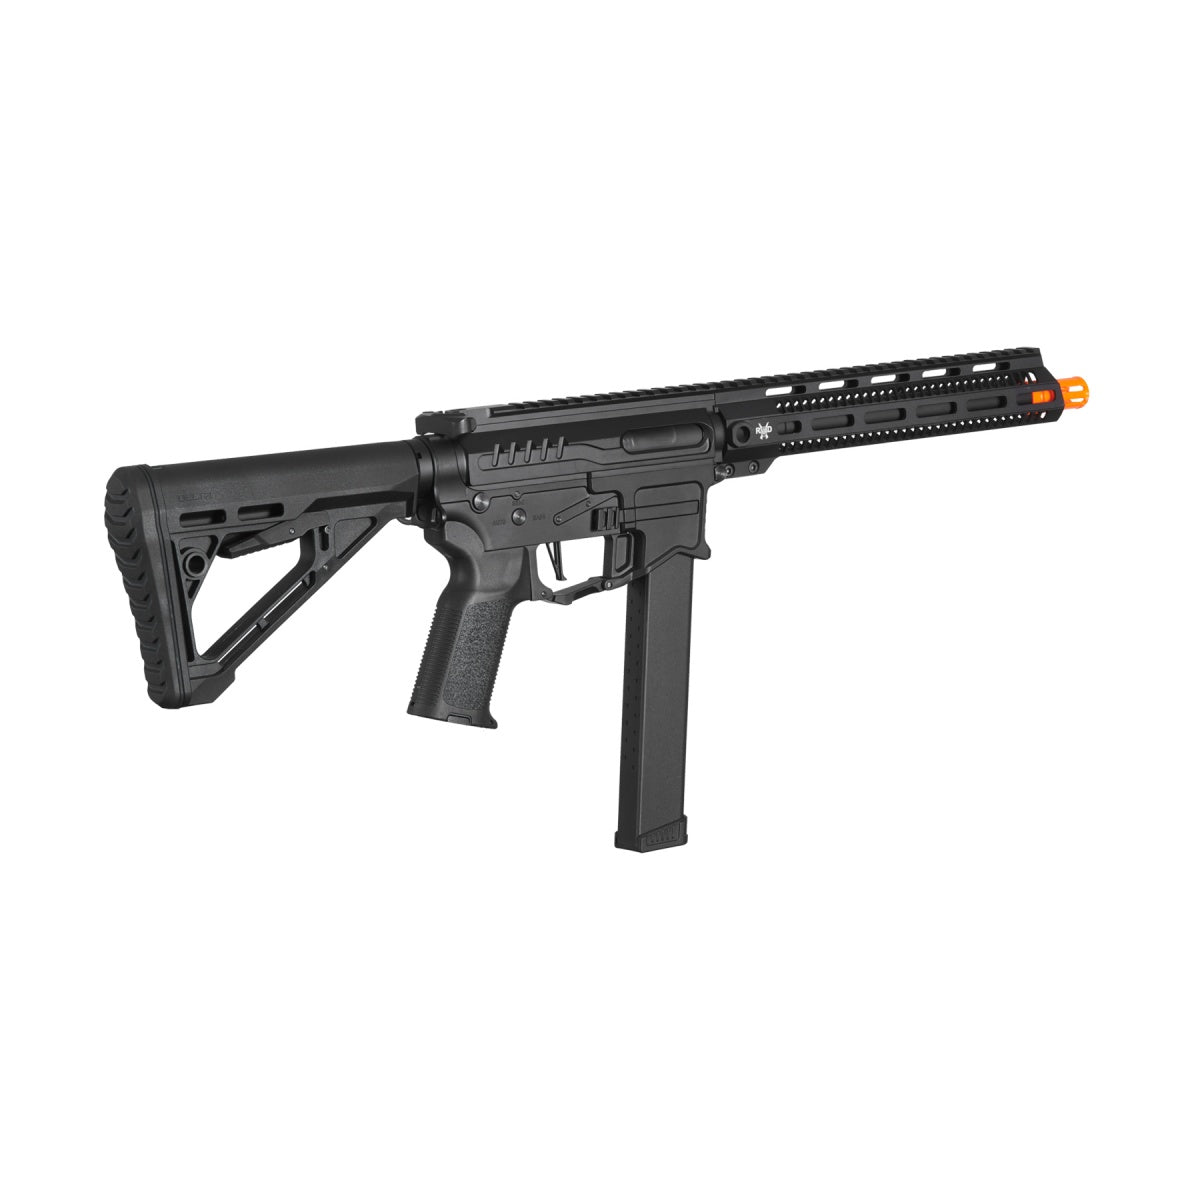 Zion Arms R&D Precision Licensed PW9 Mod 1 Long Rail Airsoft Rifle with Delta Stock (Color: Black) - ssairsoft